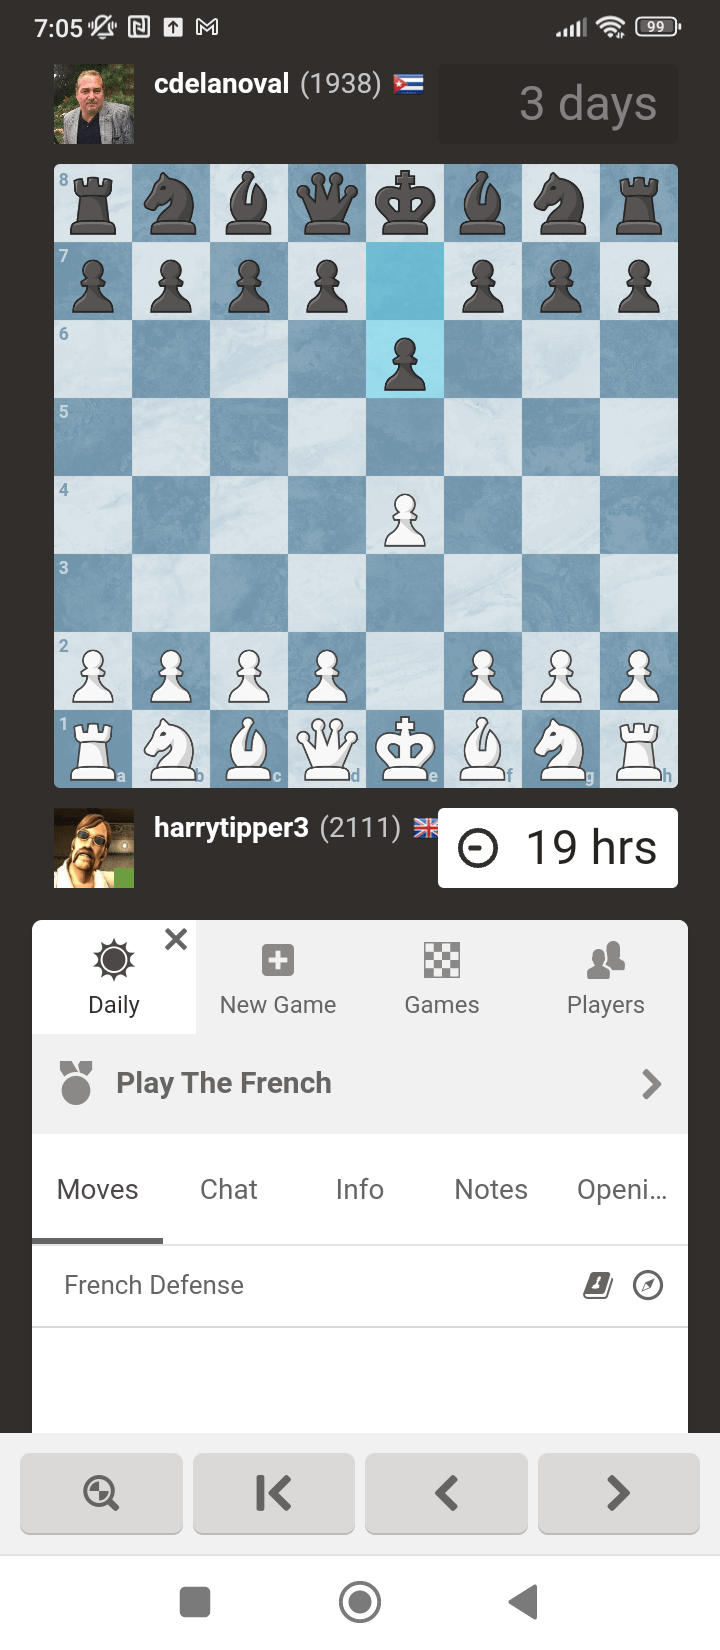 HELP!  Problems LOGIN ISSUES - Chess Forums 